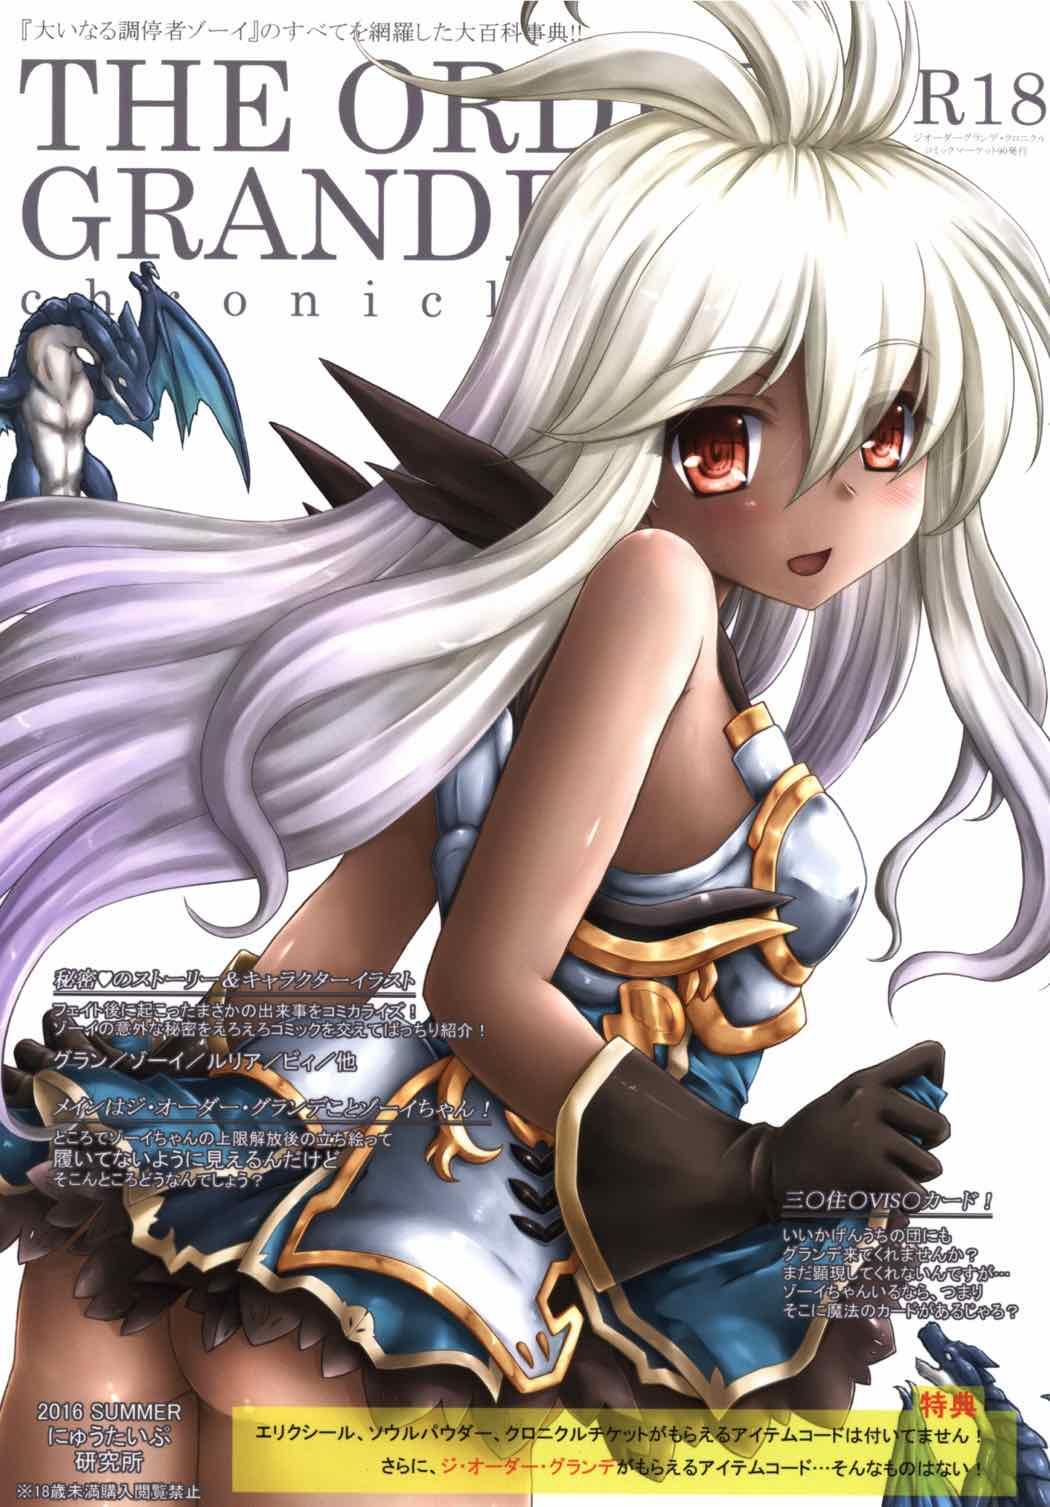 Cunnilingus THE ORDER GRANDE chronicle - Granblue fantasy Mistress - Page 1